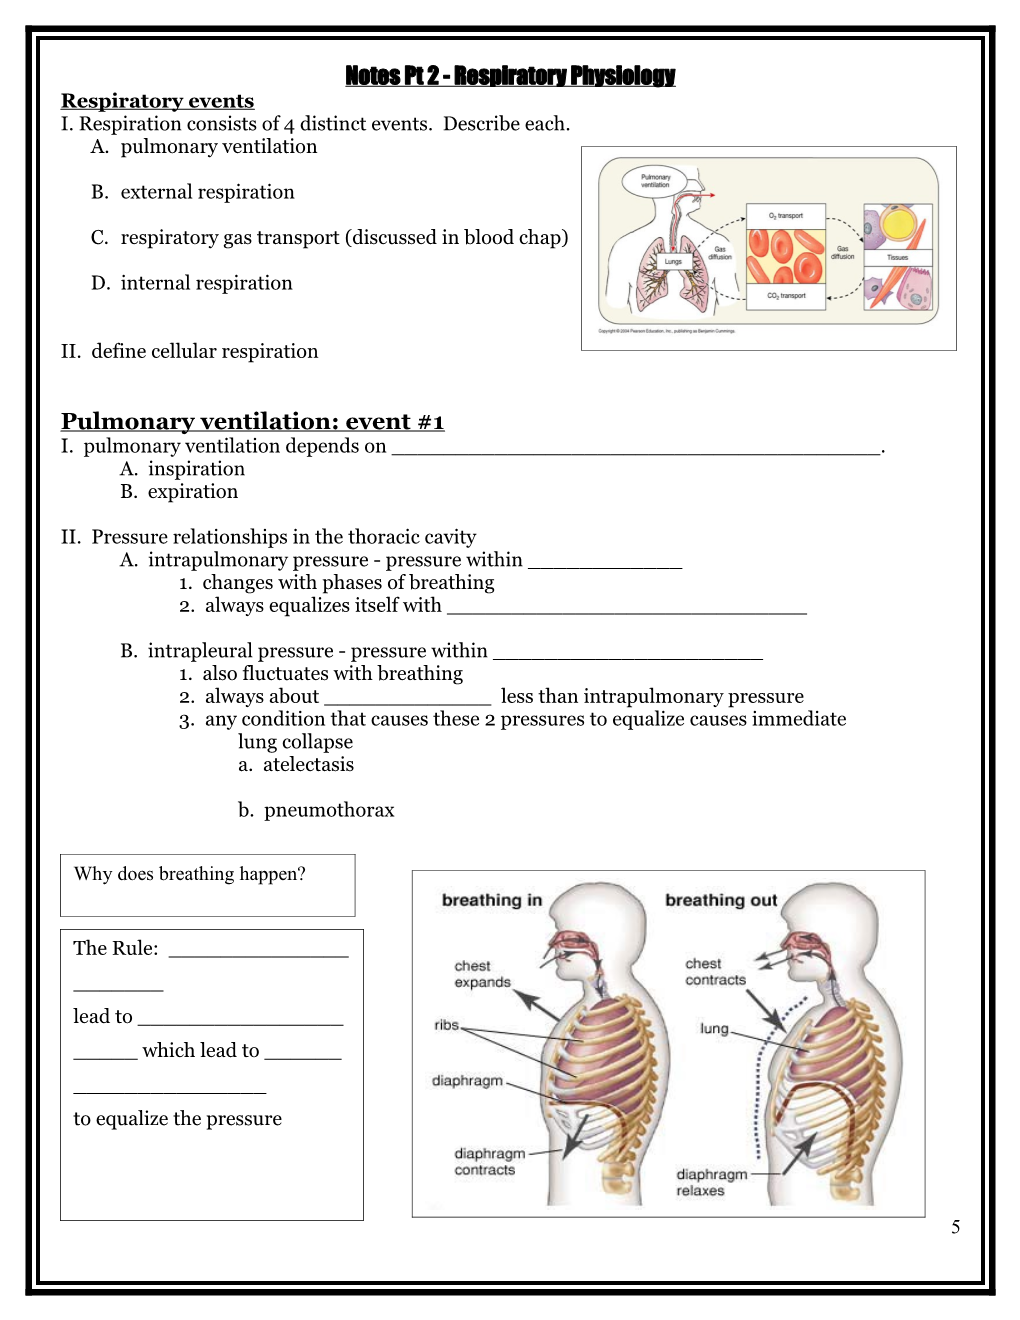 Notes Pt 2 - Respiratory Physiology